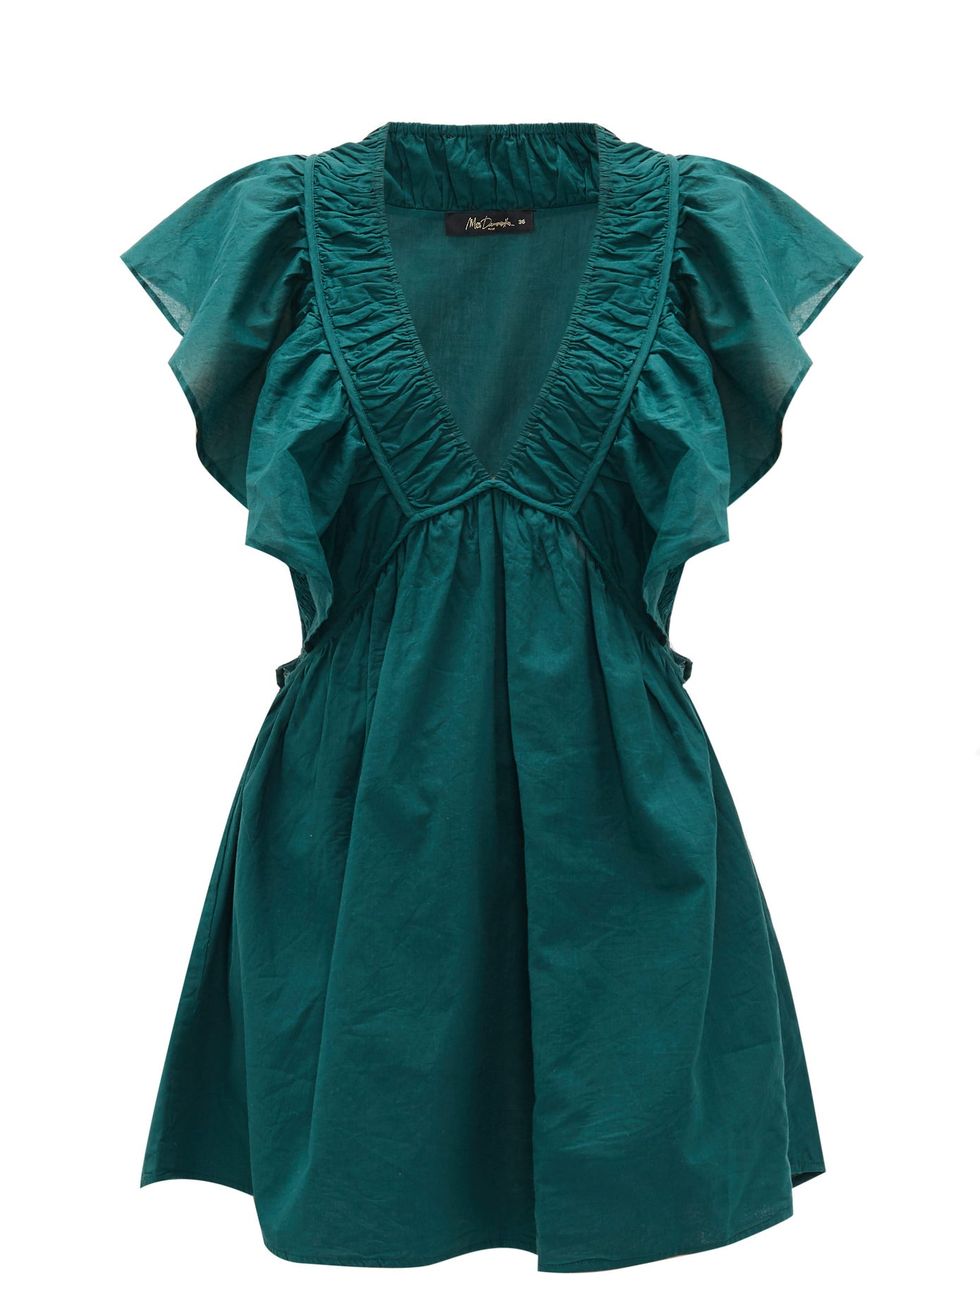 Clothing, Green, Sleeve, Dress, Day dress, Turquoise, Teal, Aqua, Cocktail dress, Outerwear, 